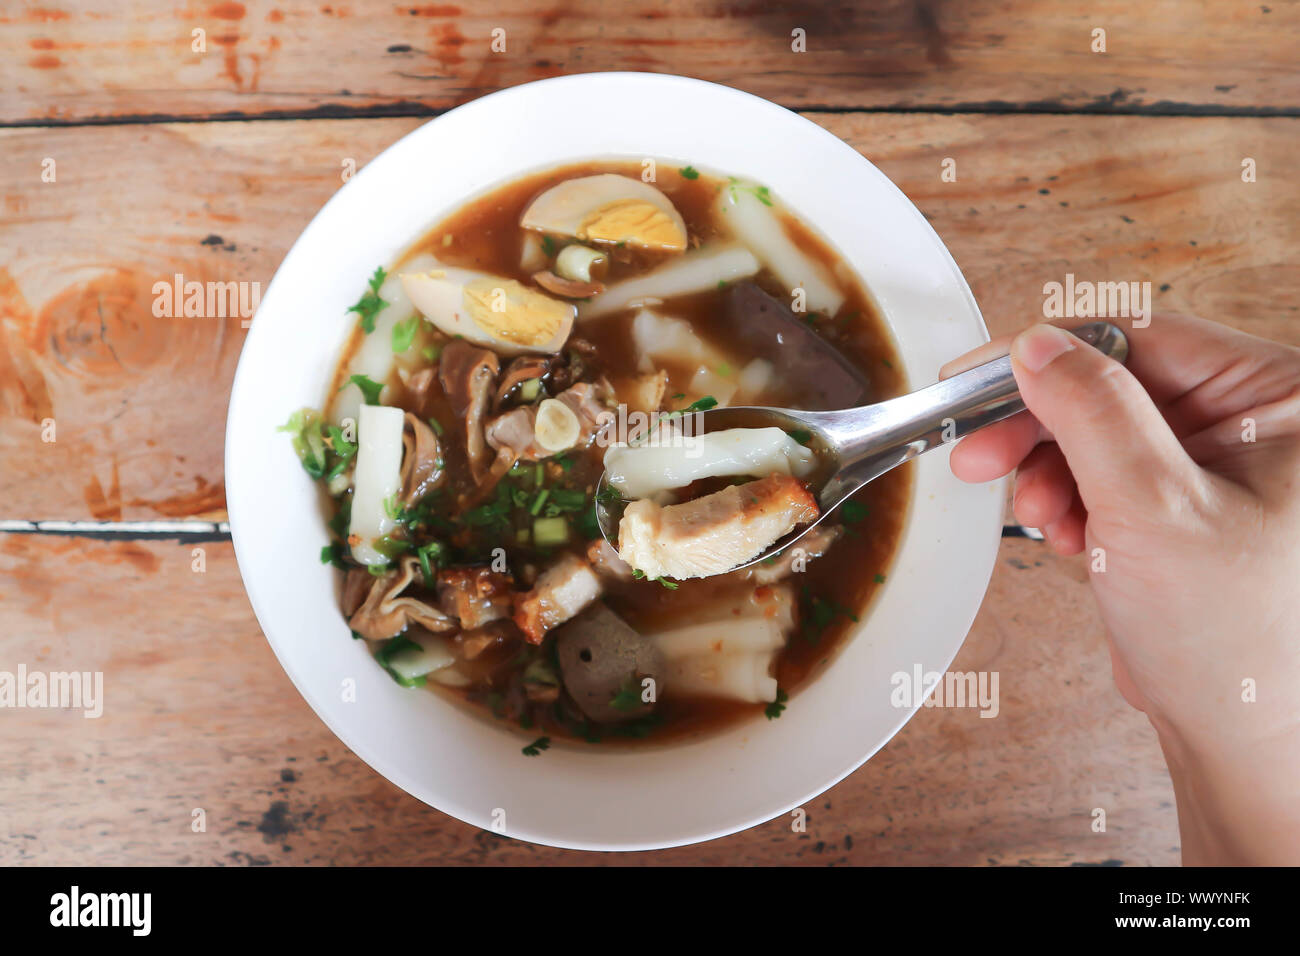 eating noodle, Chinese noodle or pork and egg noodle Stock Photo